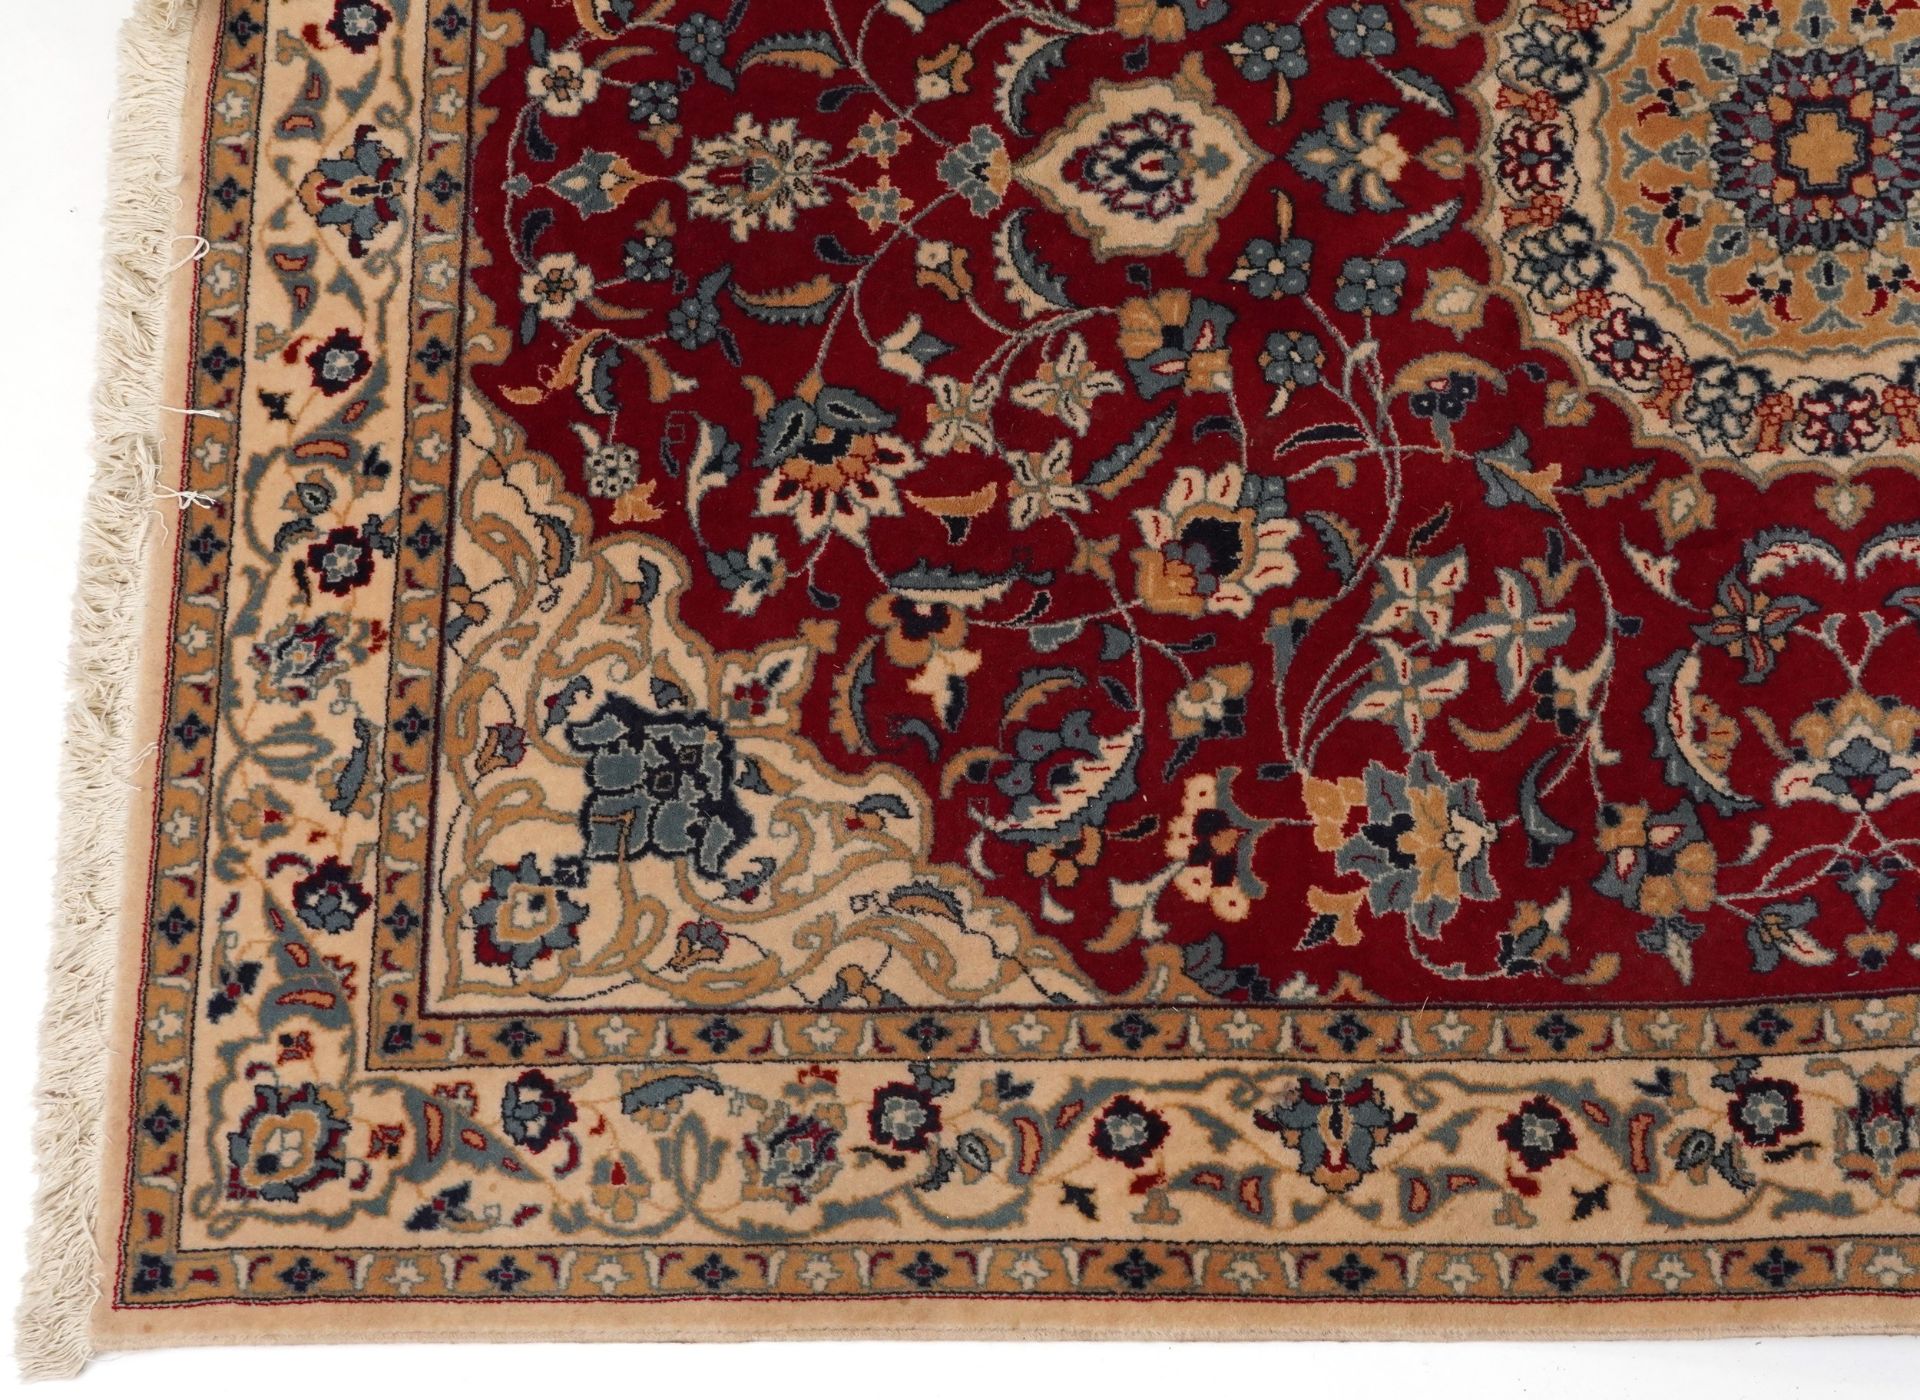 Rectangular Indian Rani rug having an allover repeat floral design on the red and cream grounds, - Image 4 of 6